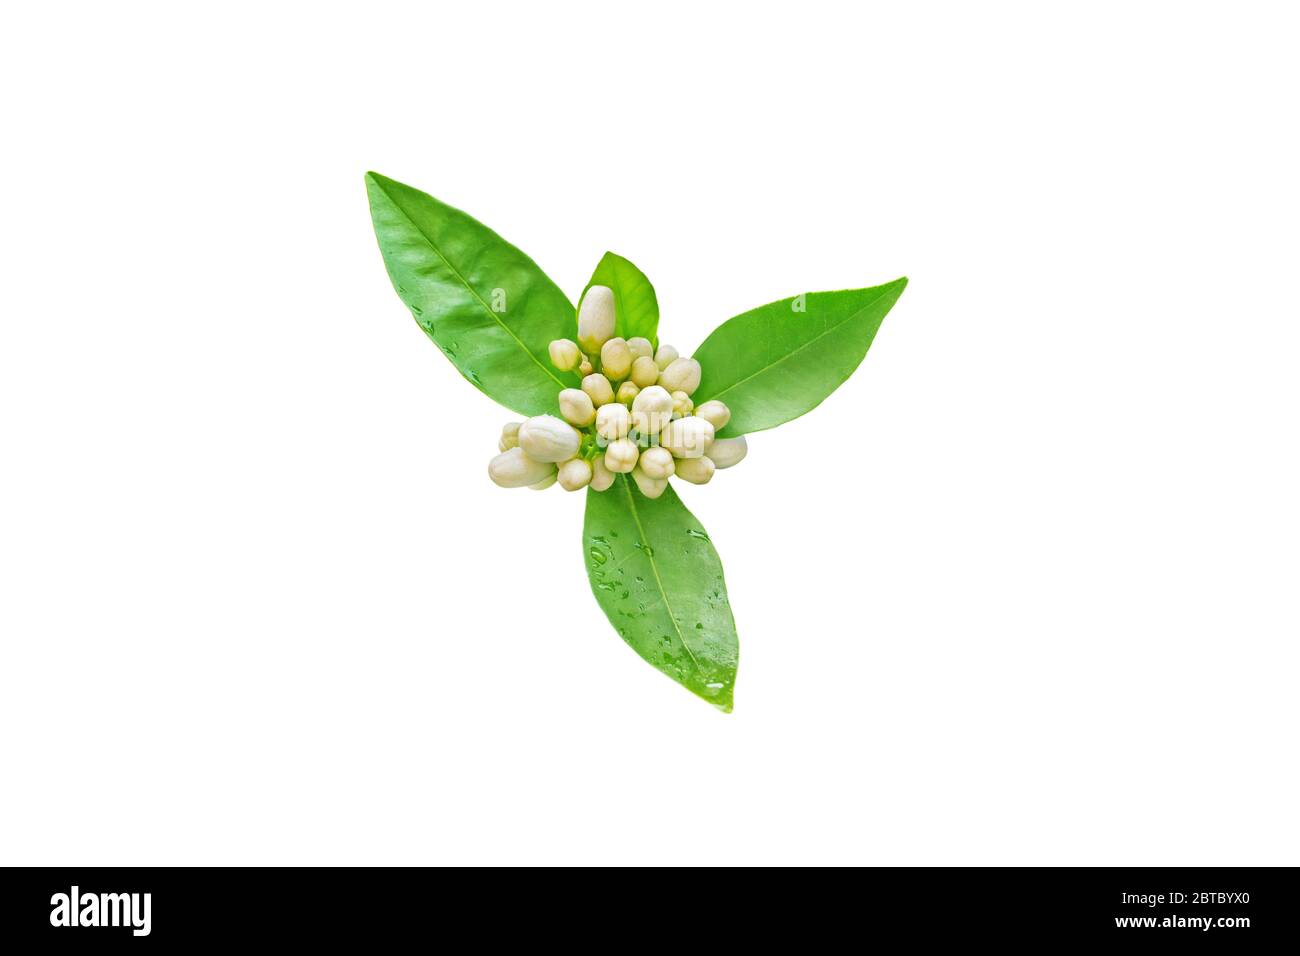 Neroli flowers buds and green foliage with rain drops isolated on white. Orange tree blossom. Stock Photo